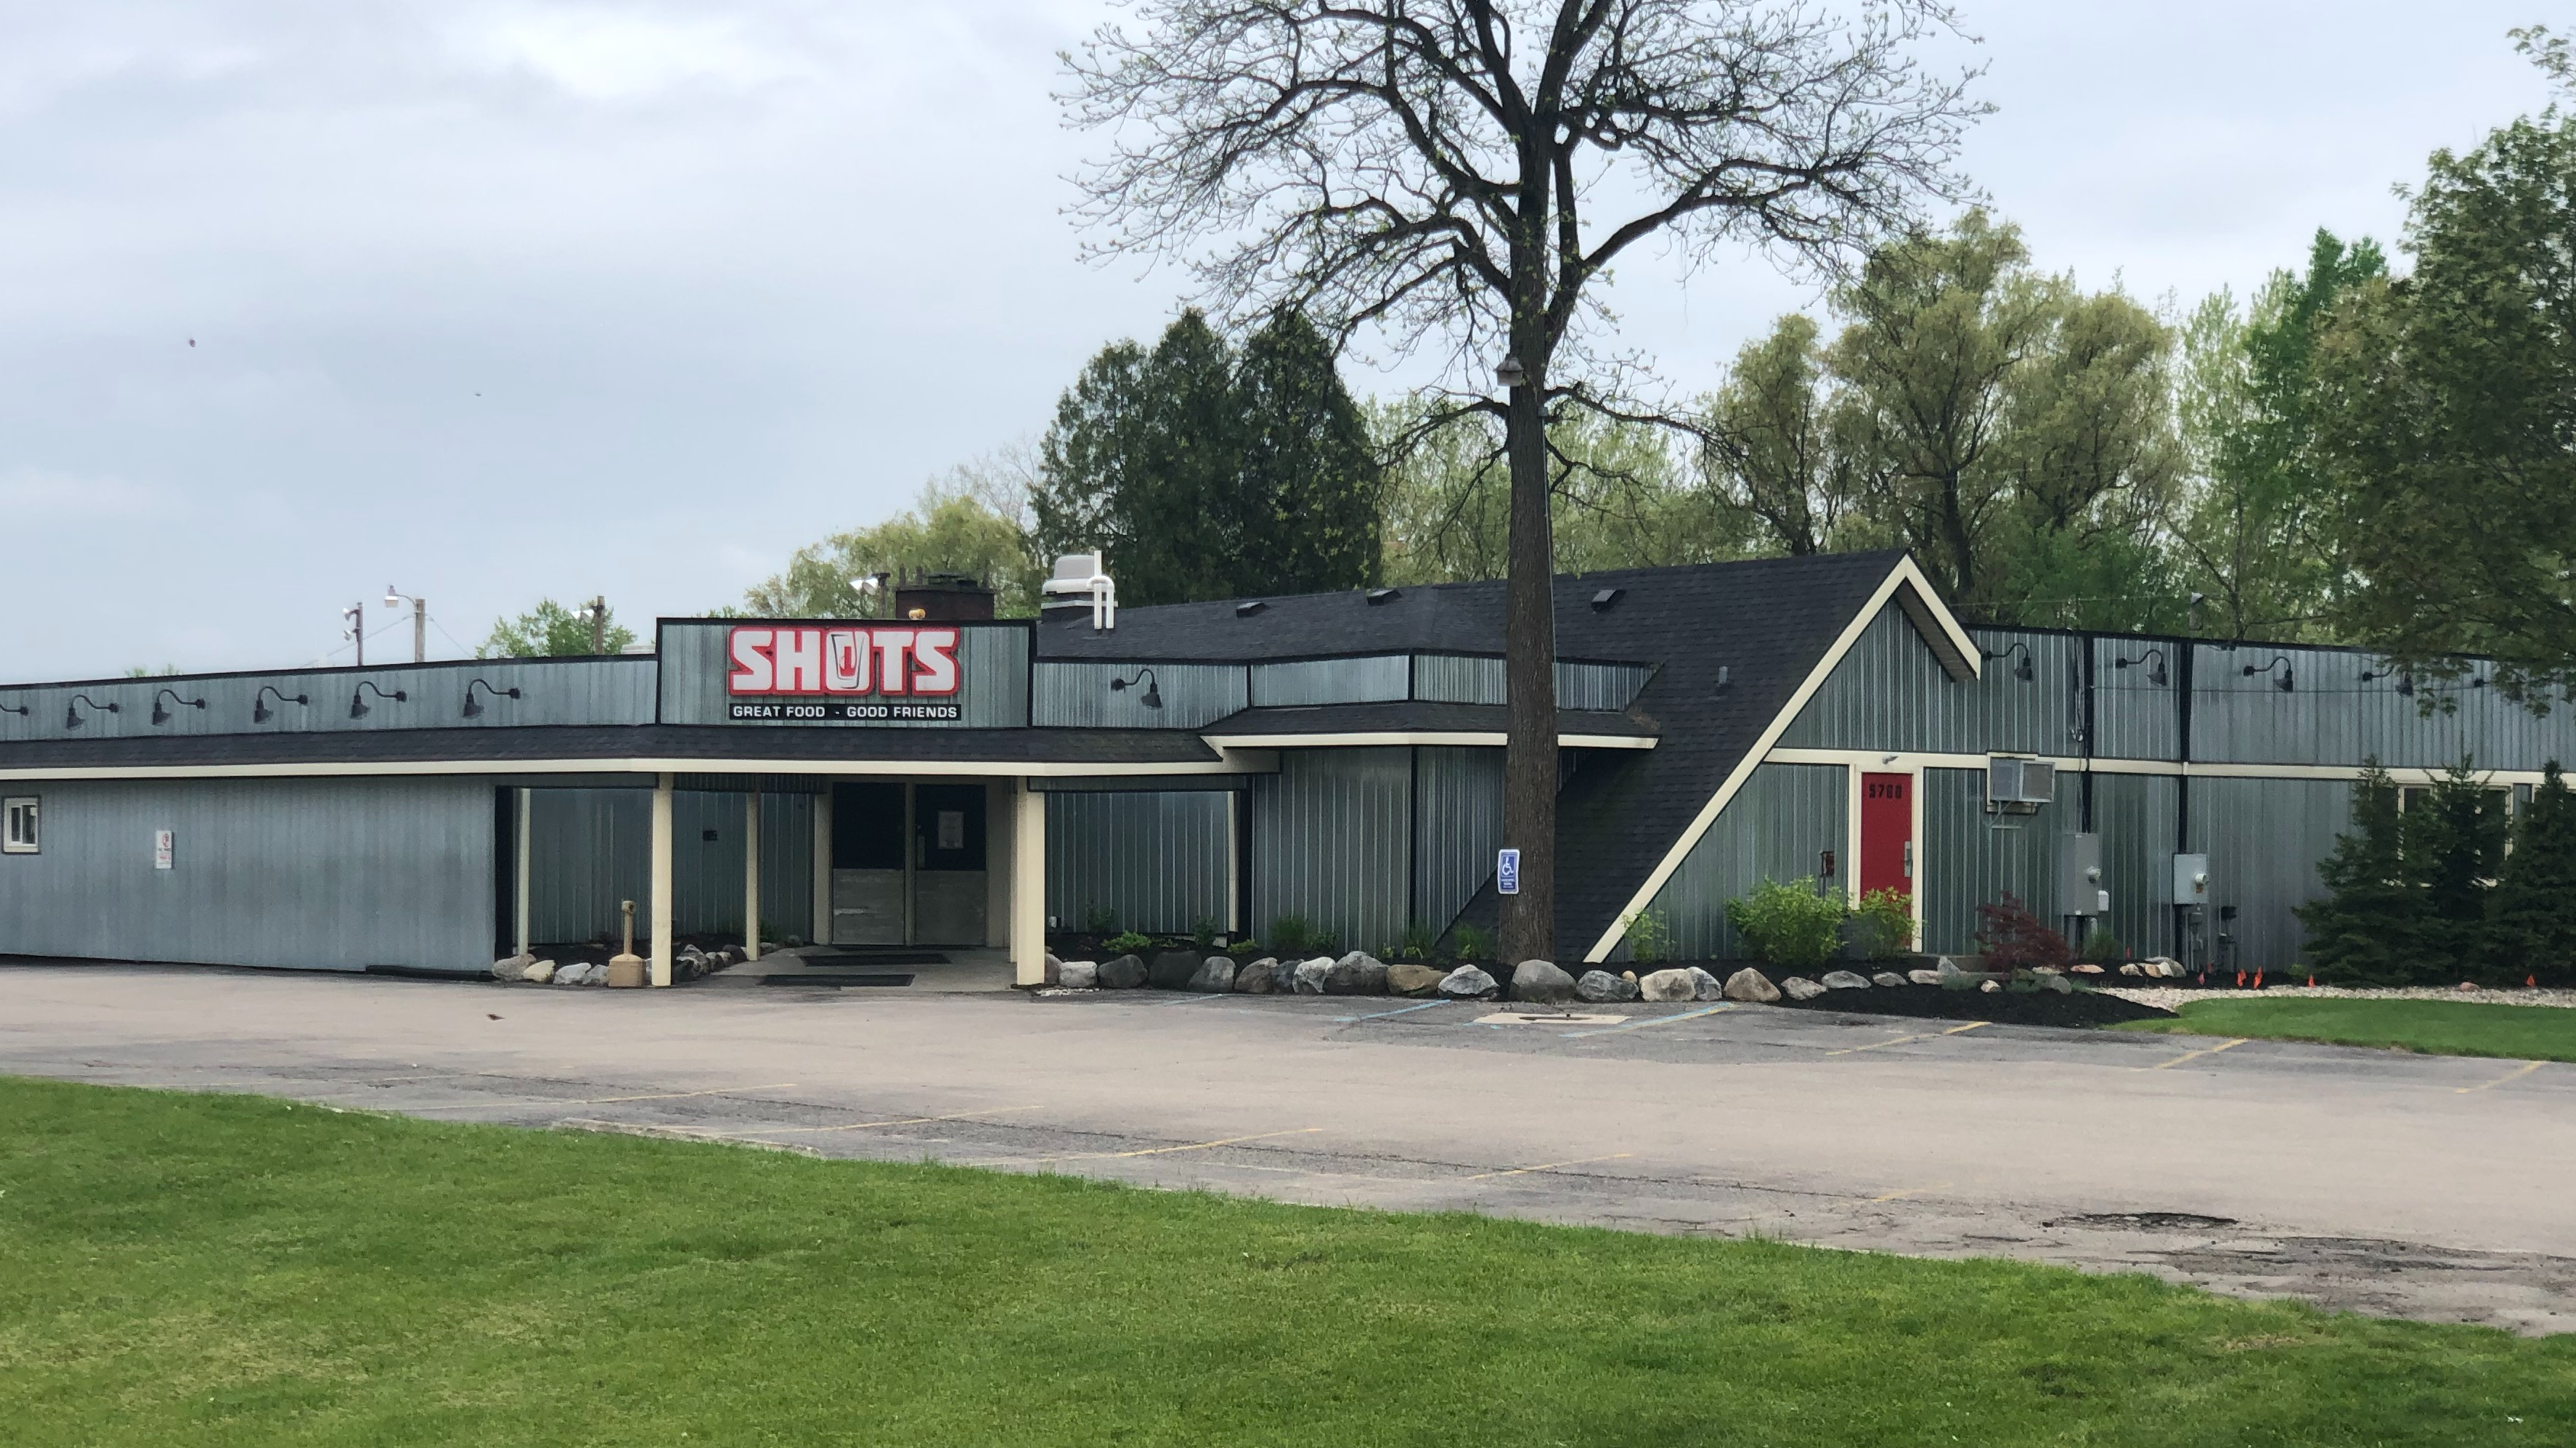 SHOTS ON THE RIVER will be doing Happy Hour ALL DAY on Mondays.